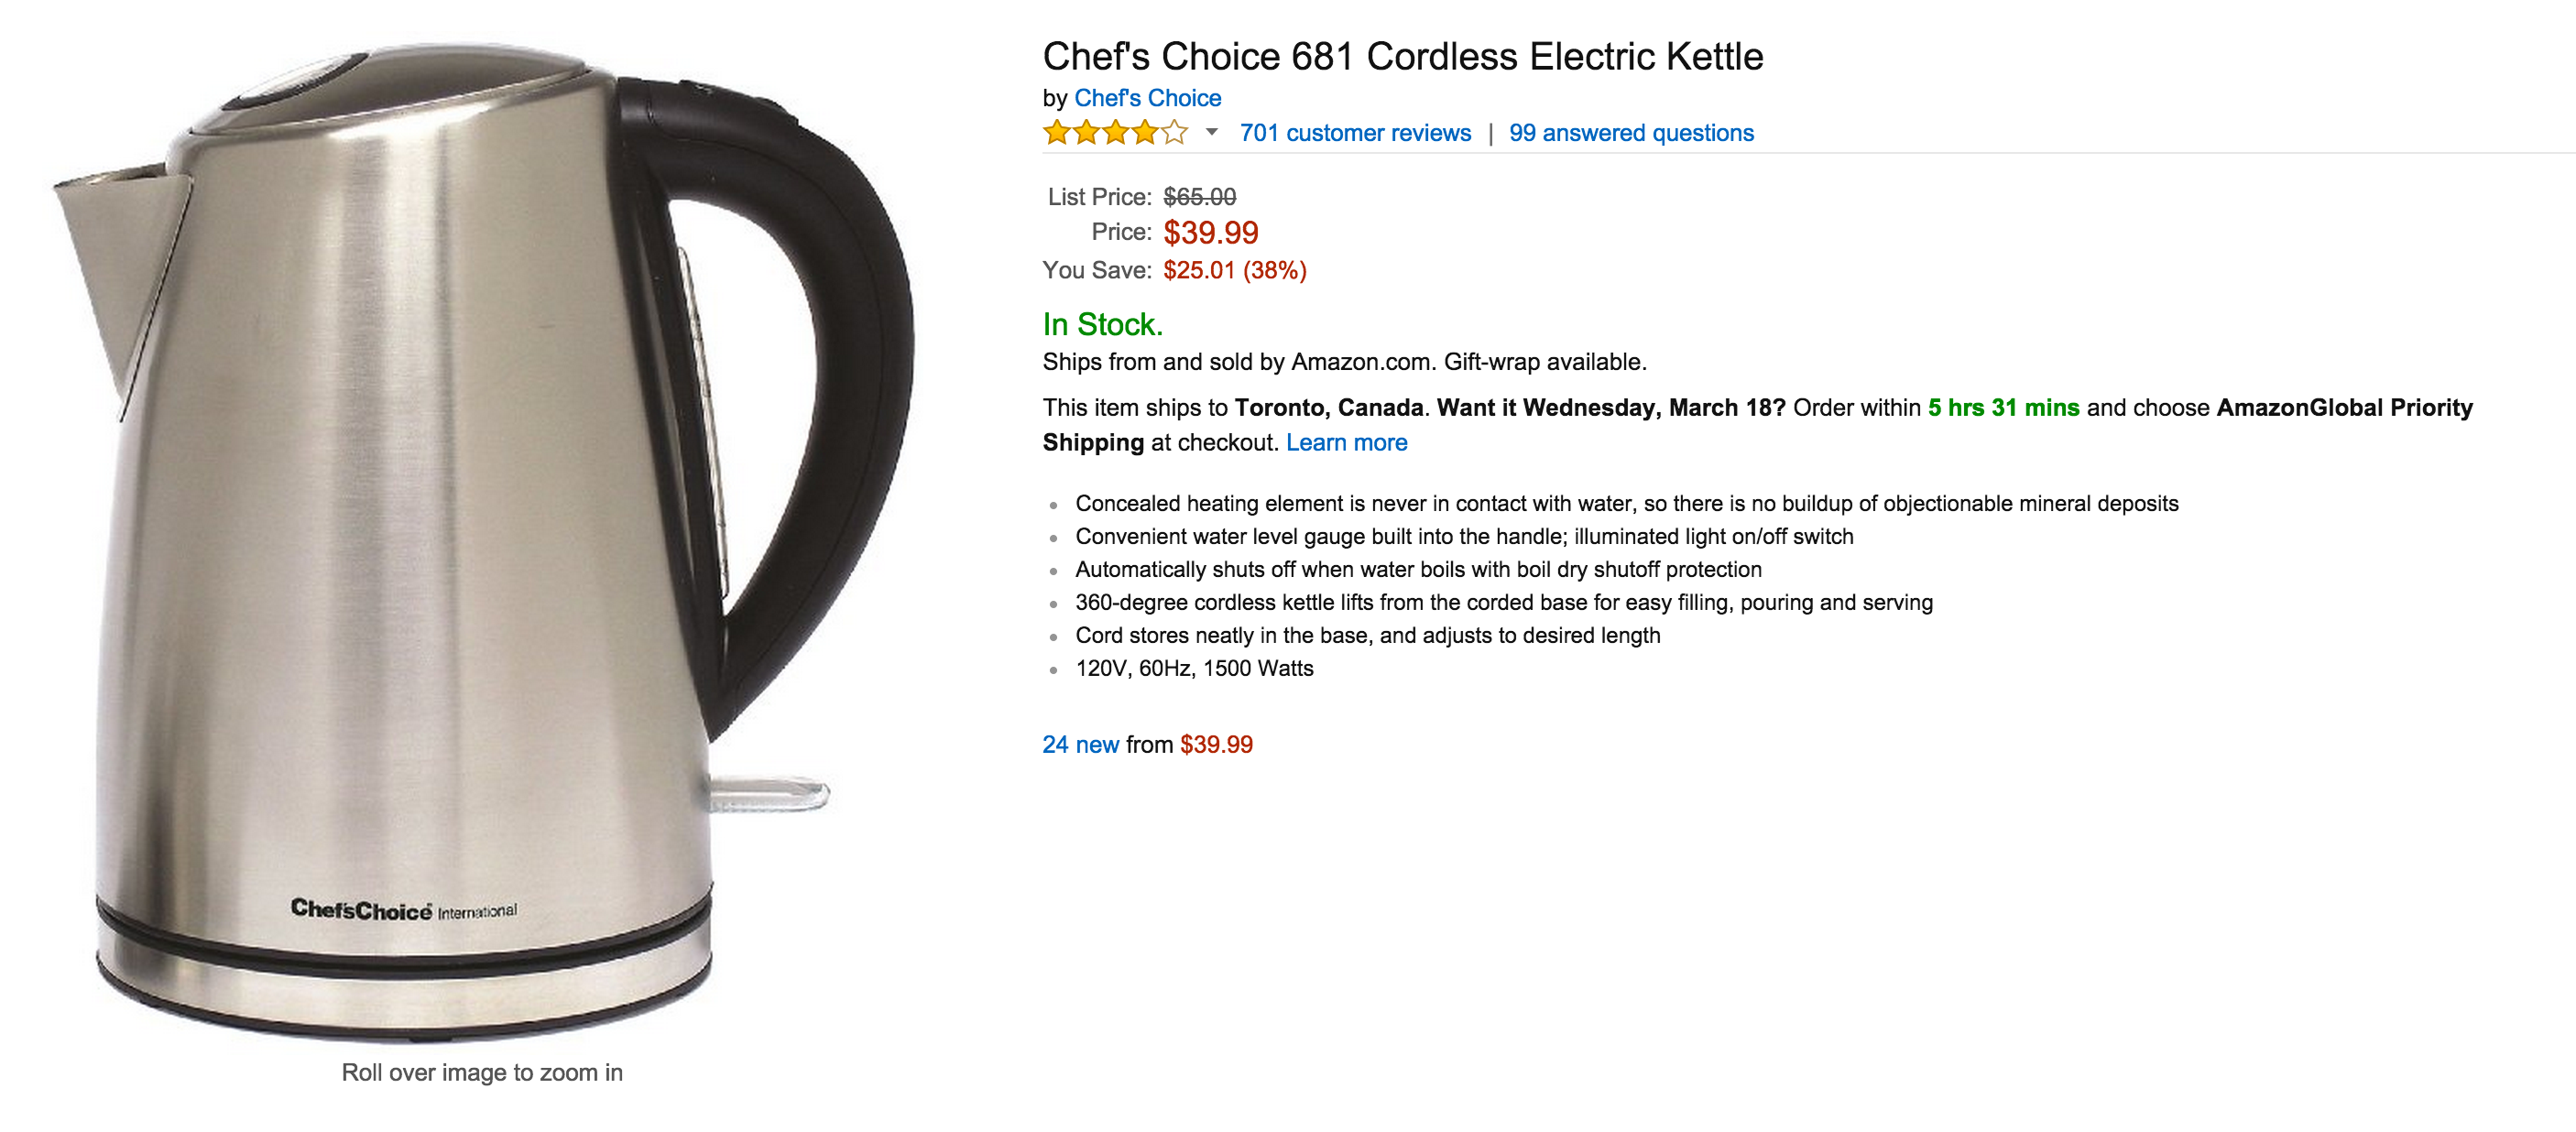 https://9to5toys.com/wp-content/uploads/sites/5/2015/03/chefs-choice-brushed-stainless-steel-cordless-electric-kettle-681-sale-04.png